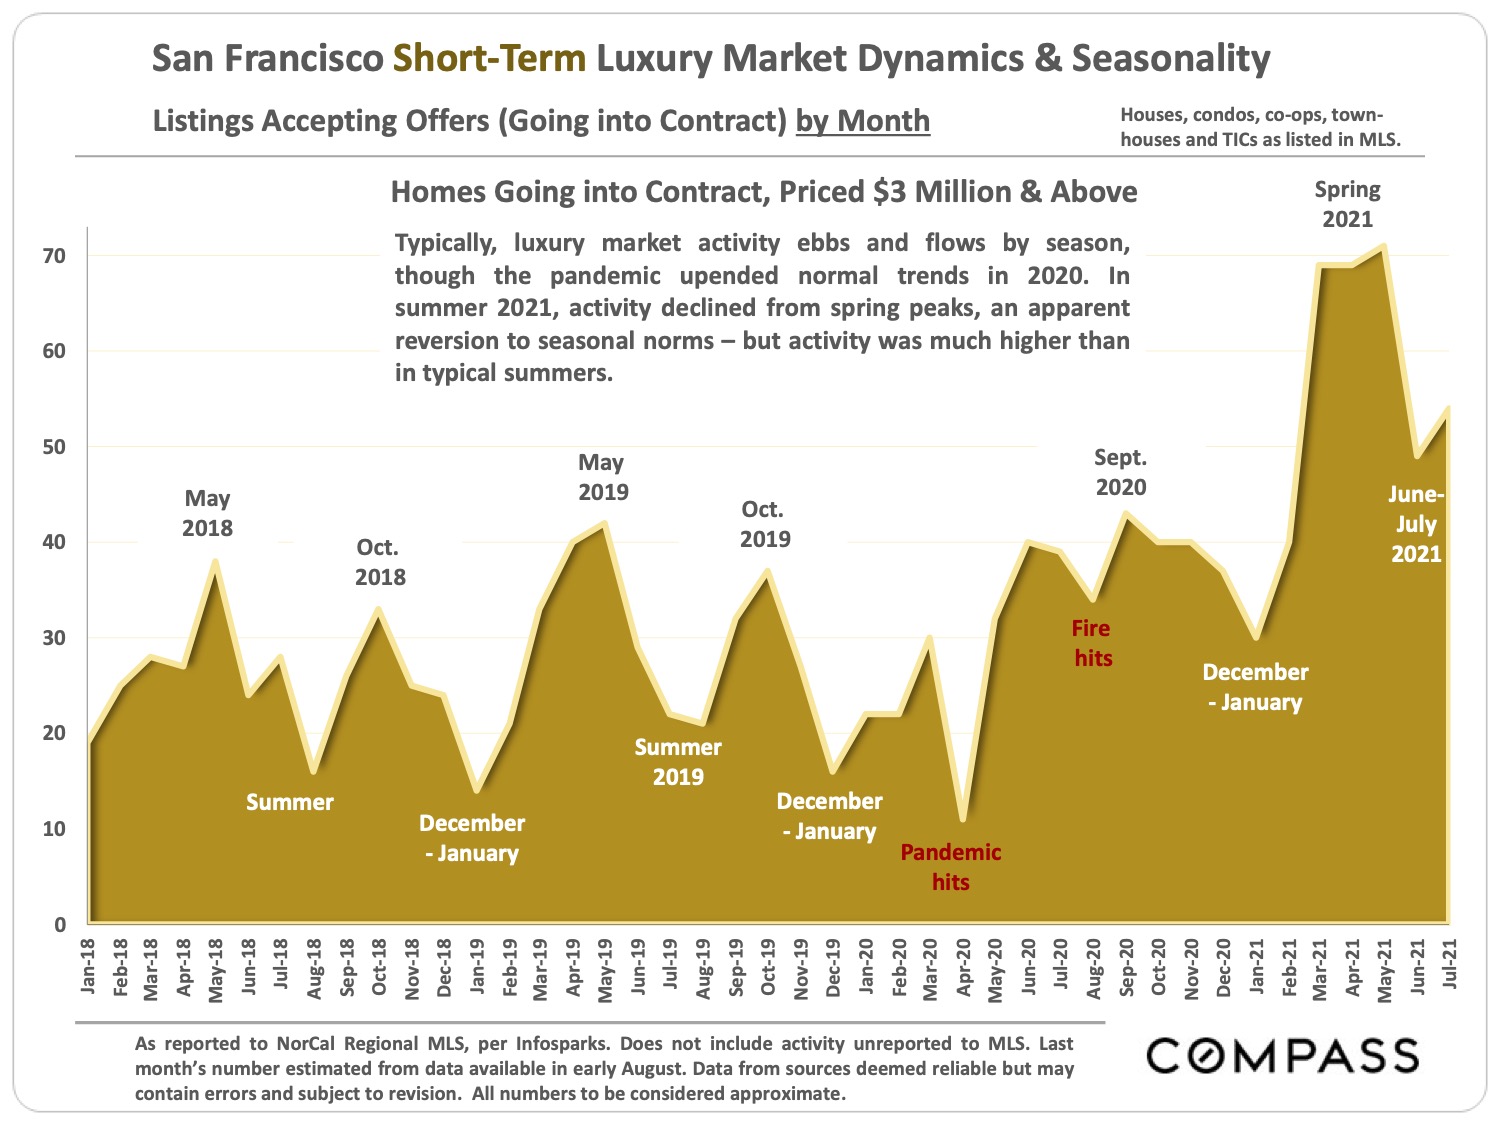 Image of San Francisco Short Term Luxury Market Dynamics & Seasonality Listings Accepting Offers Going Into A Contract by Month